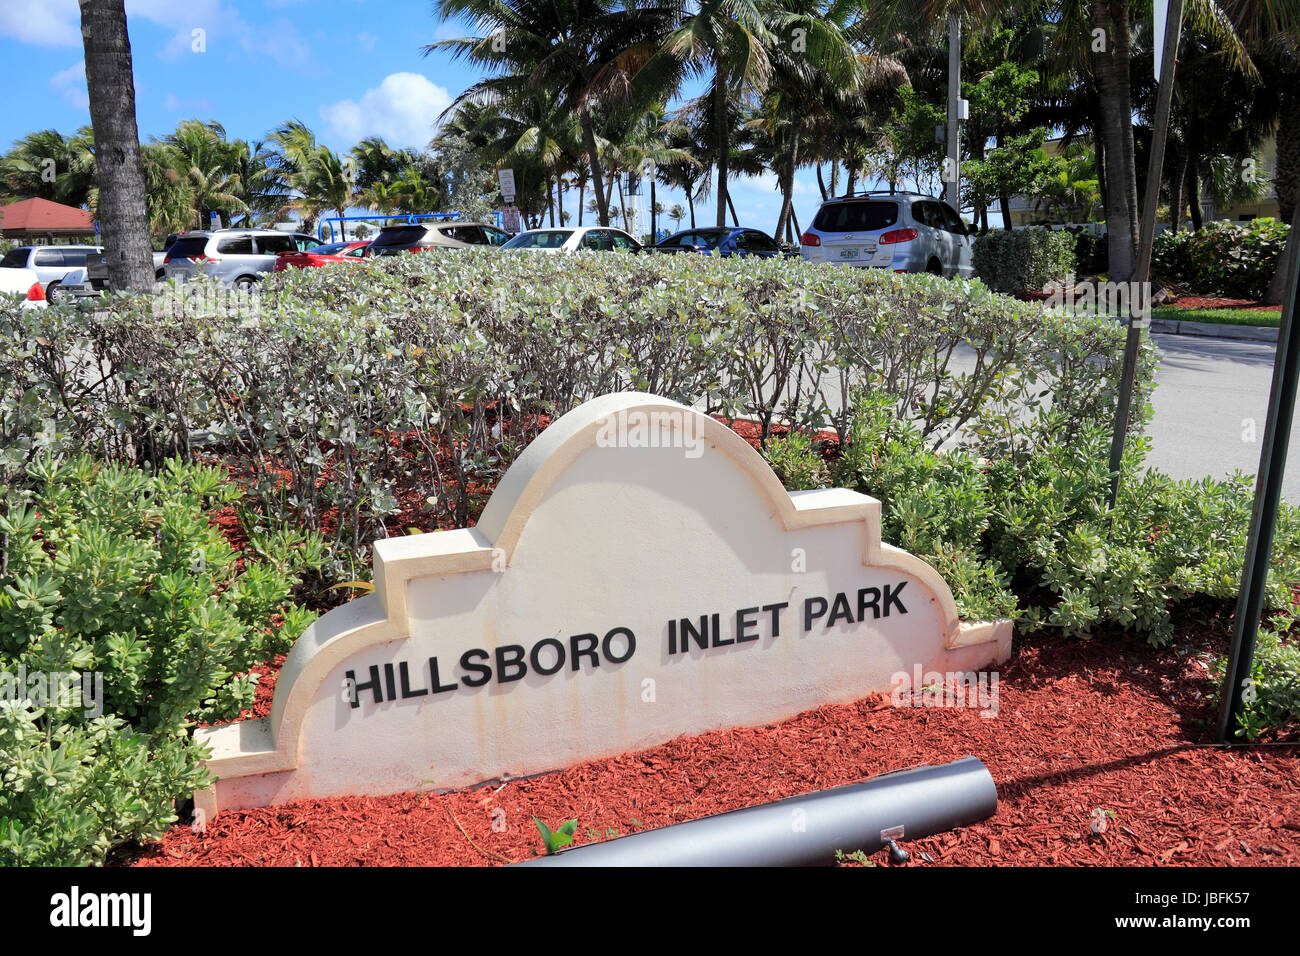 POMPANO BEACH, FLORIDA - FEBRUARY 12, 2014: Entry sign to the left of opening to Hillsboro Inlet Park and parking where many vehicles are parked and is located near the lighthouse on a sunny day. Stock Photo